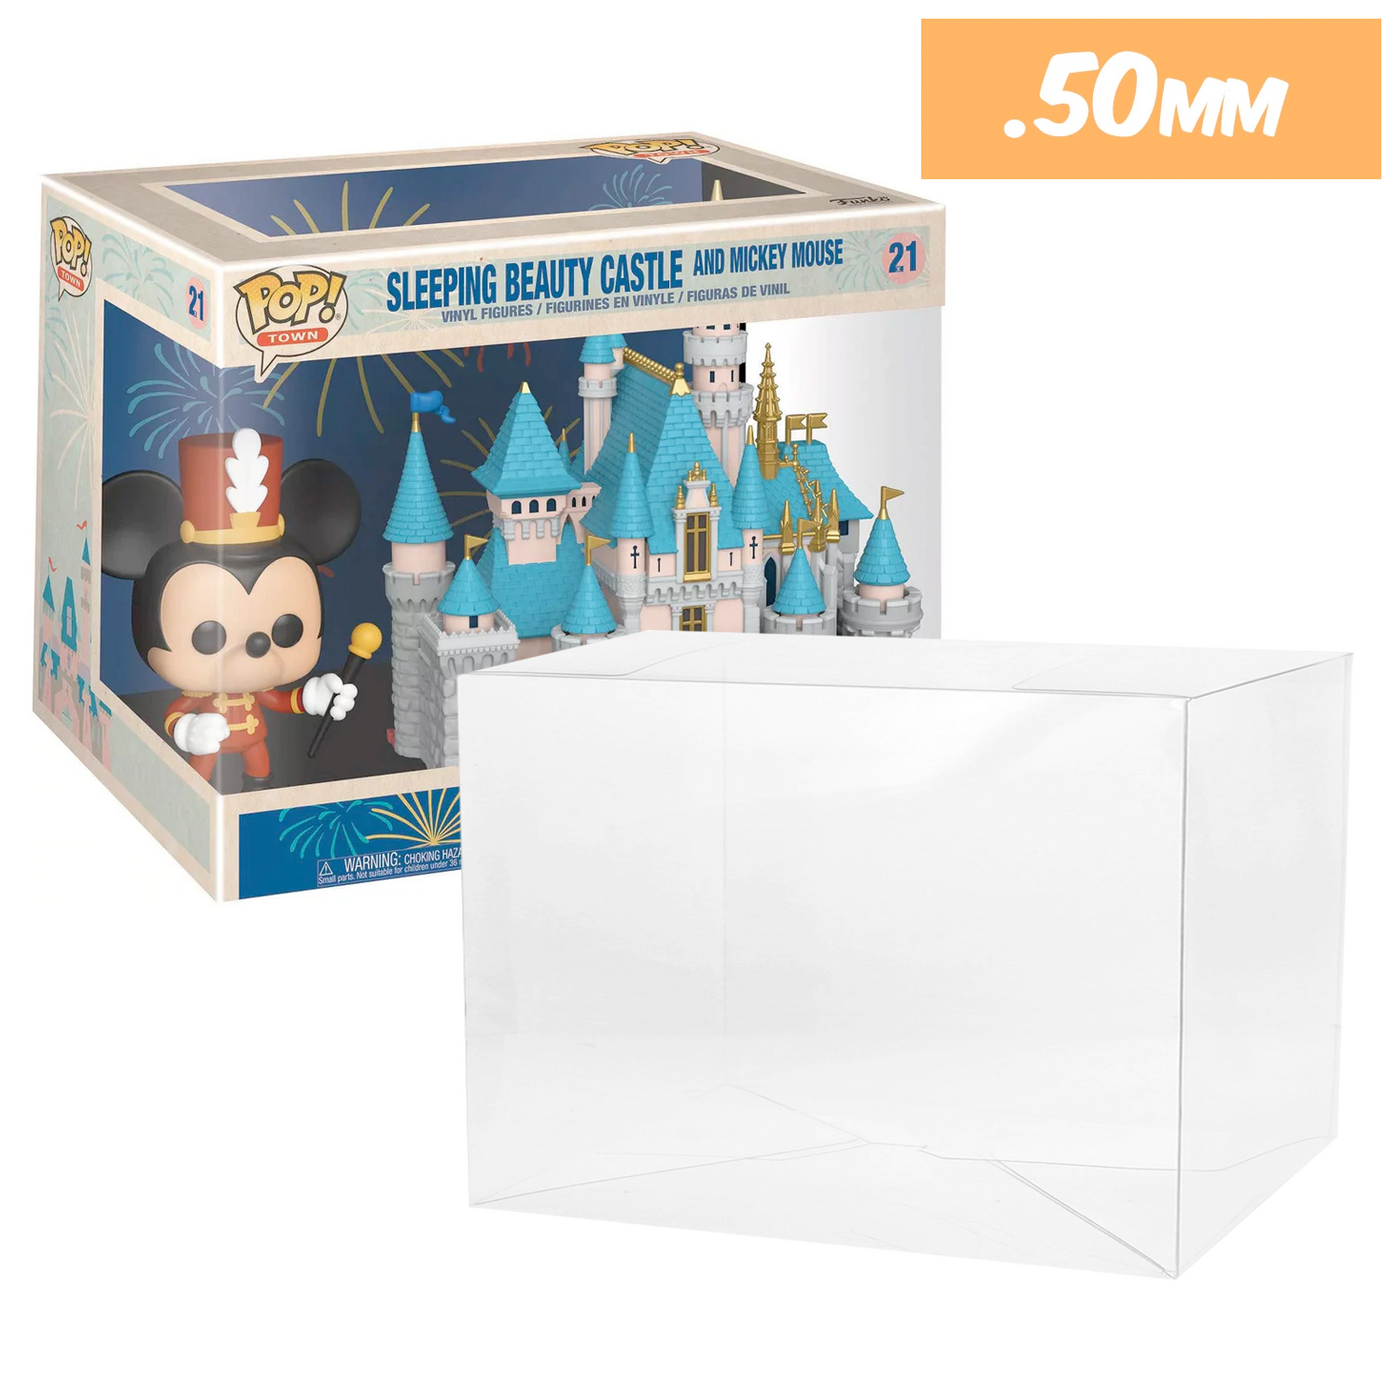 21 mickey sleeping beauty town best funko pop protectors thick strong uv scratch flat top stack vinyl display geek plastic shield vaulted eco armor fits collect protect display case kollector protector